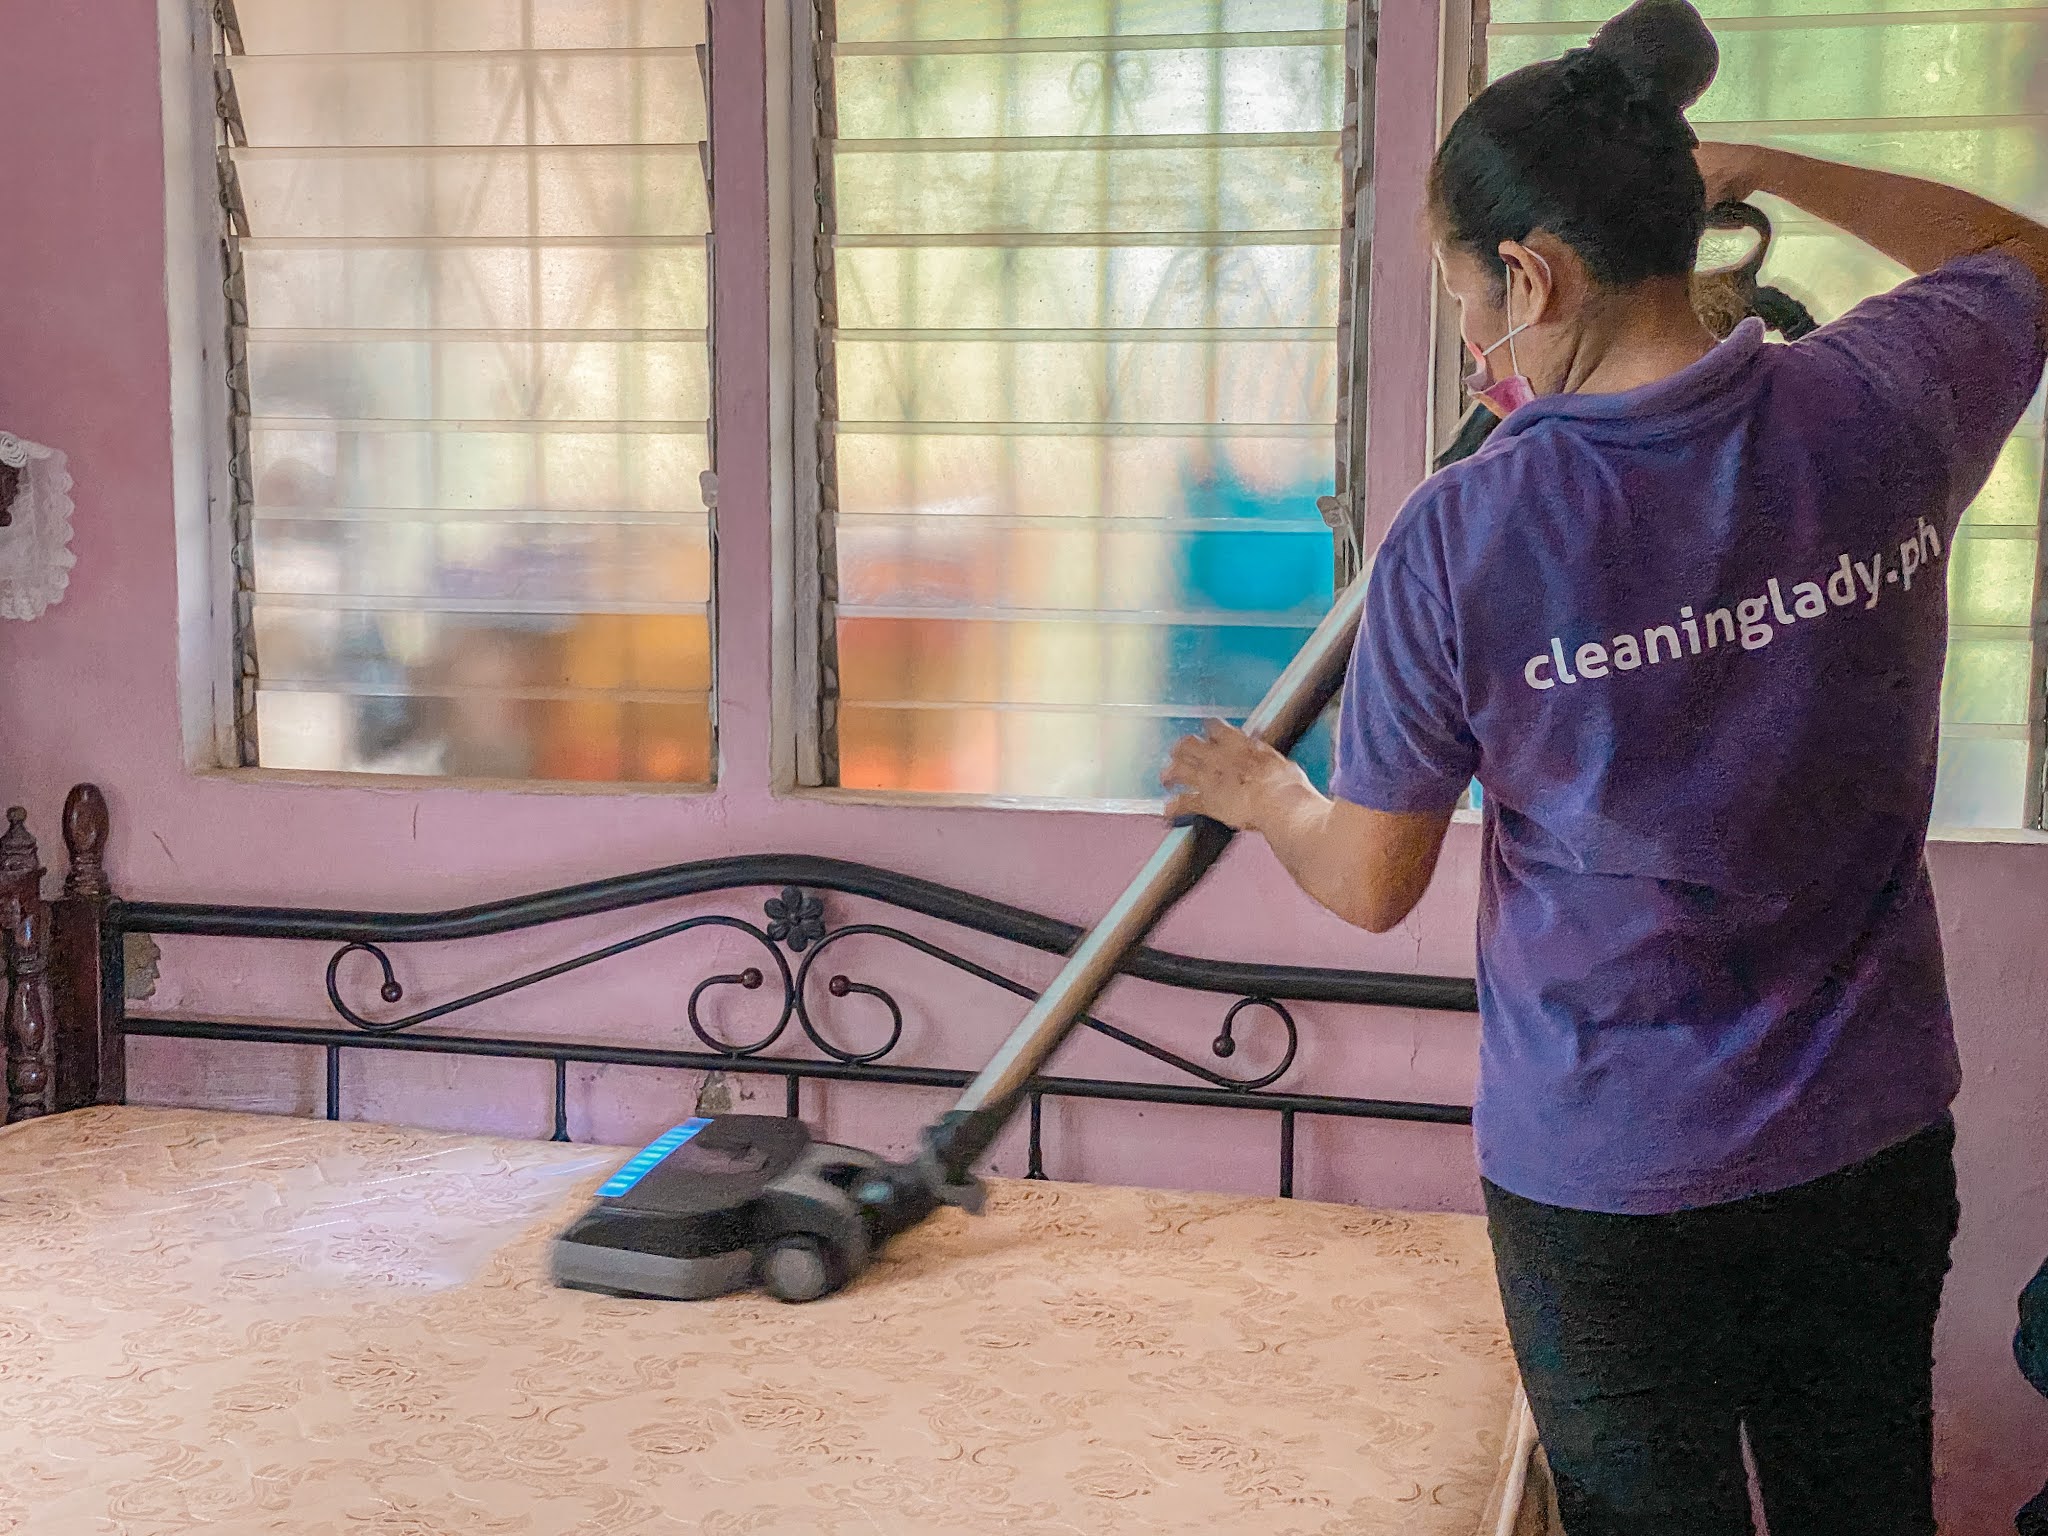 Cleaning Lady: House Cleaning Service